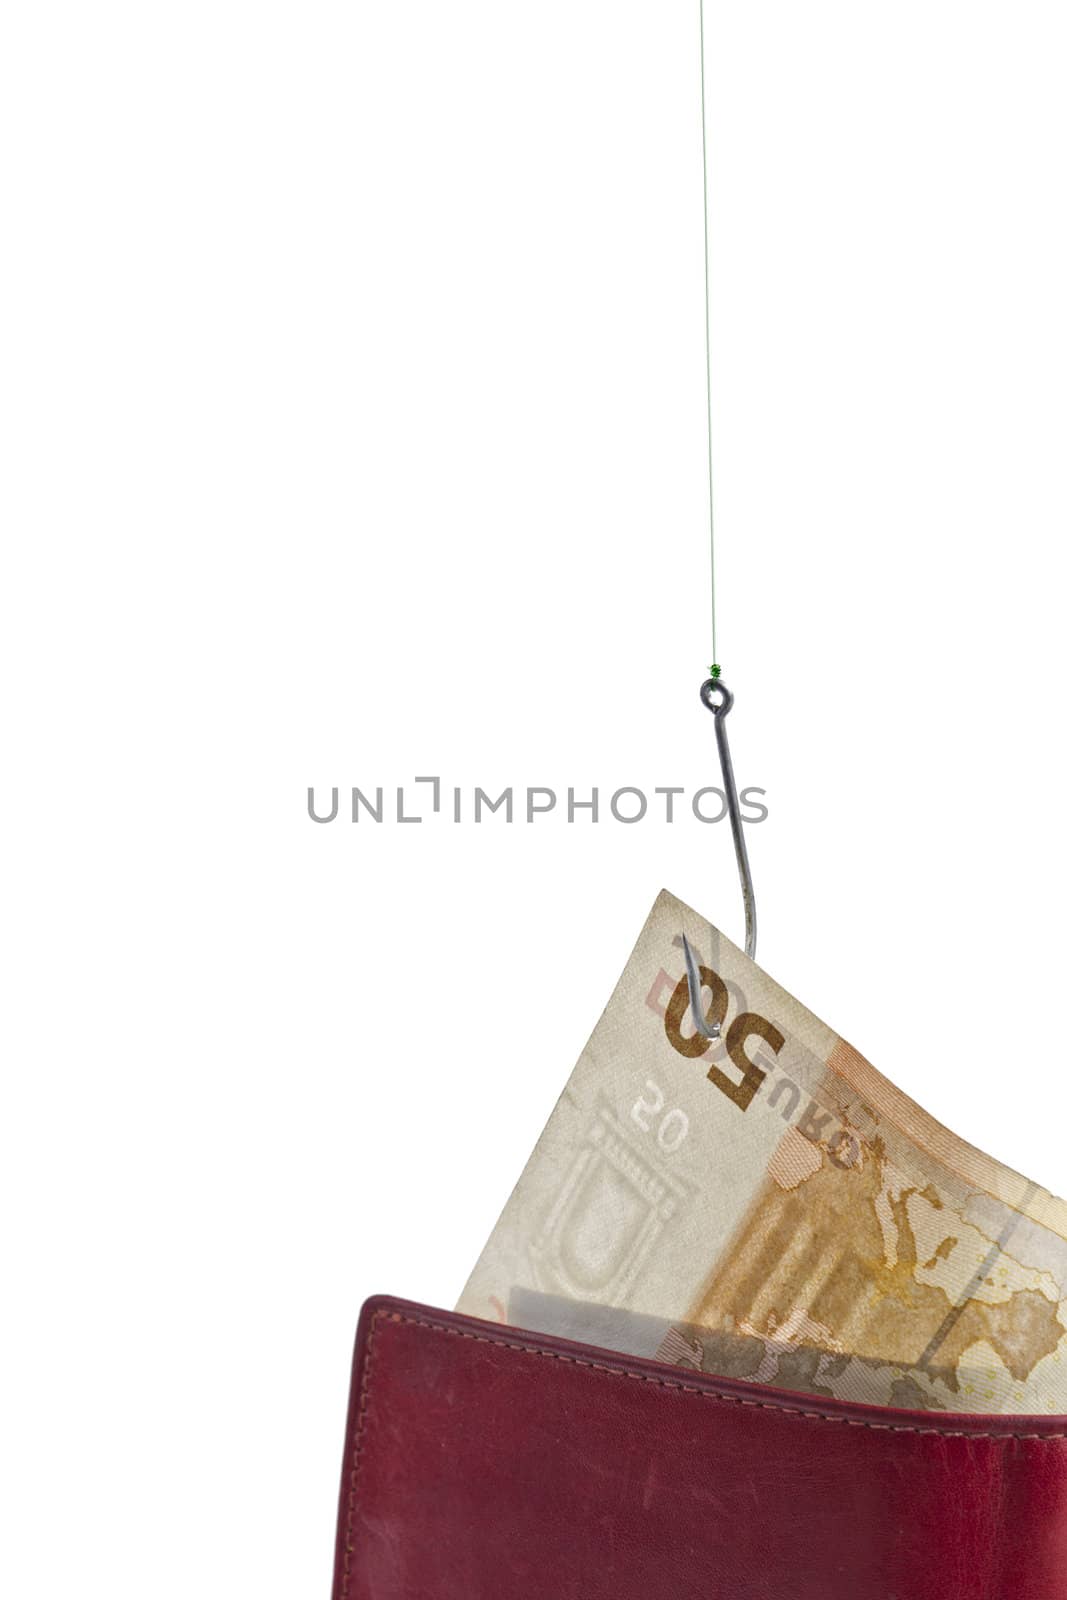 stealing cash card out of red wallet -  isolated on white background